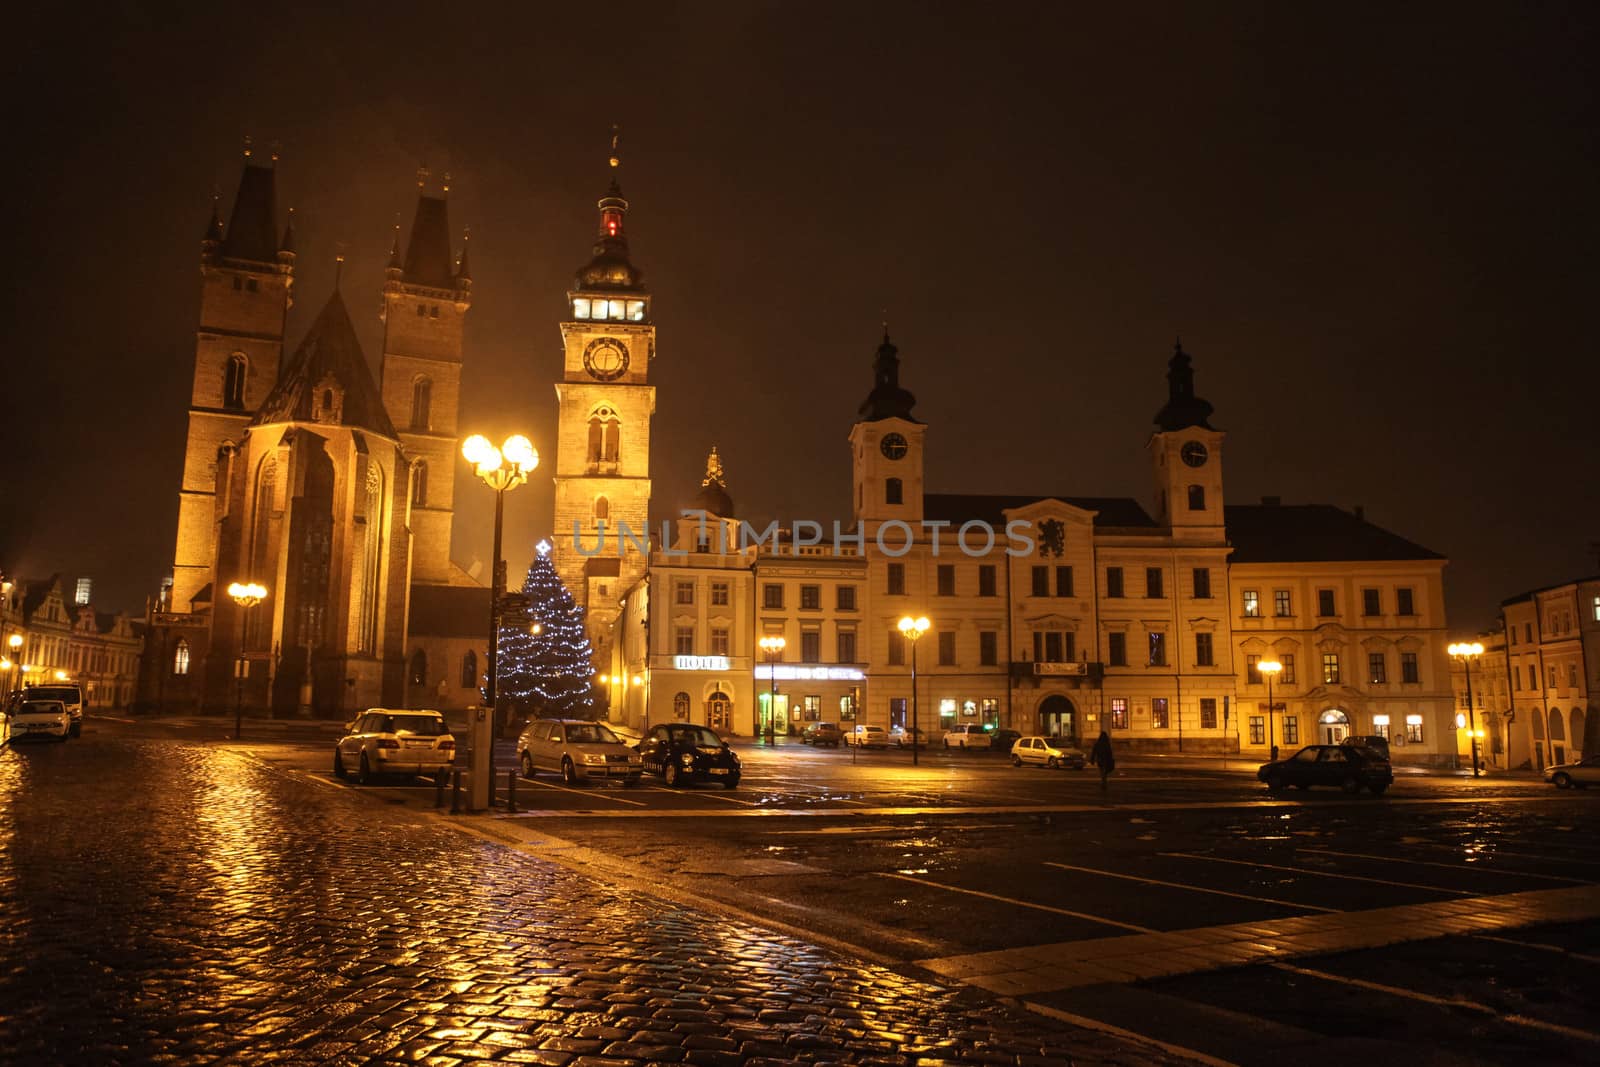 Hradec Králové, the Czech Republic - January 03, 2013: View at the Velké náměstí (Great Square), main old town square in the Czech Republic city of Hradec Králové at night, with illuminated 14th Century Cathedral of the Holy Spirit (on the left), Renaissance campanile White Tower (the highest building in the middle), the Town Hall and other surrounding buildings. One unrecognizable person visible in the picture.